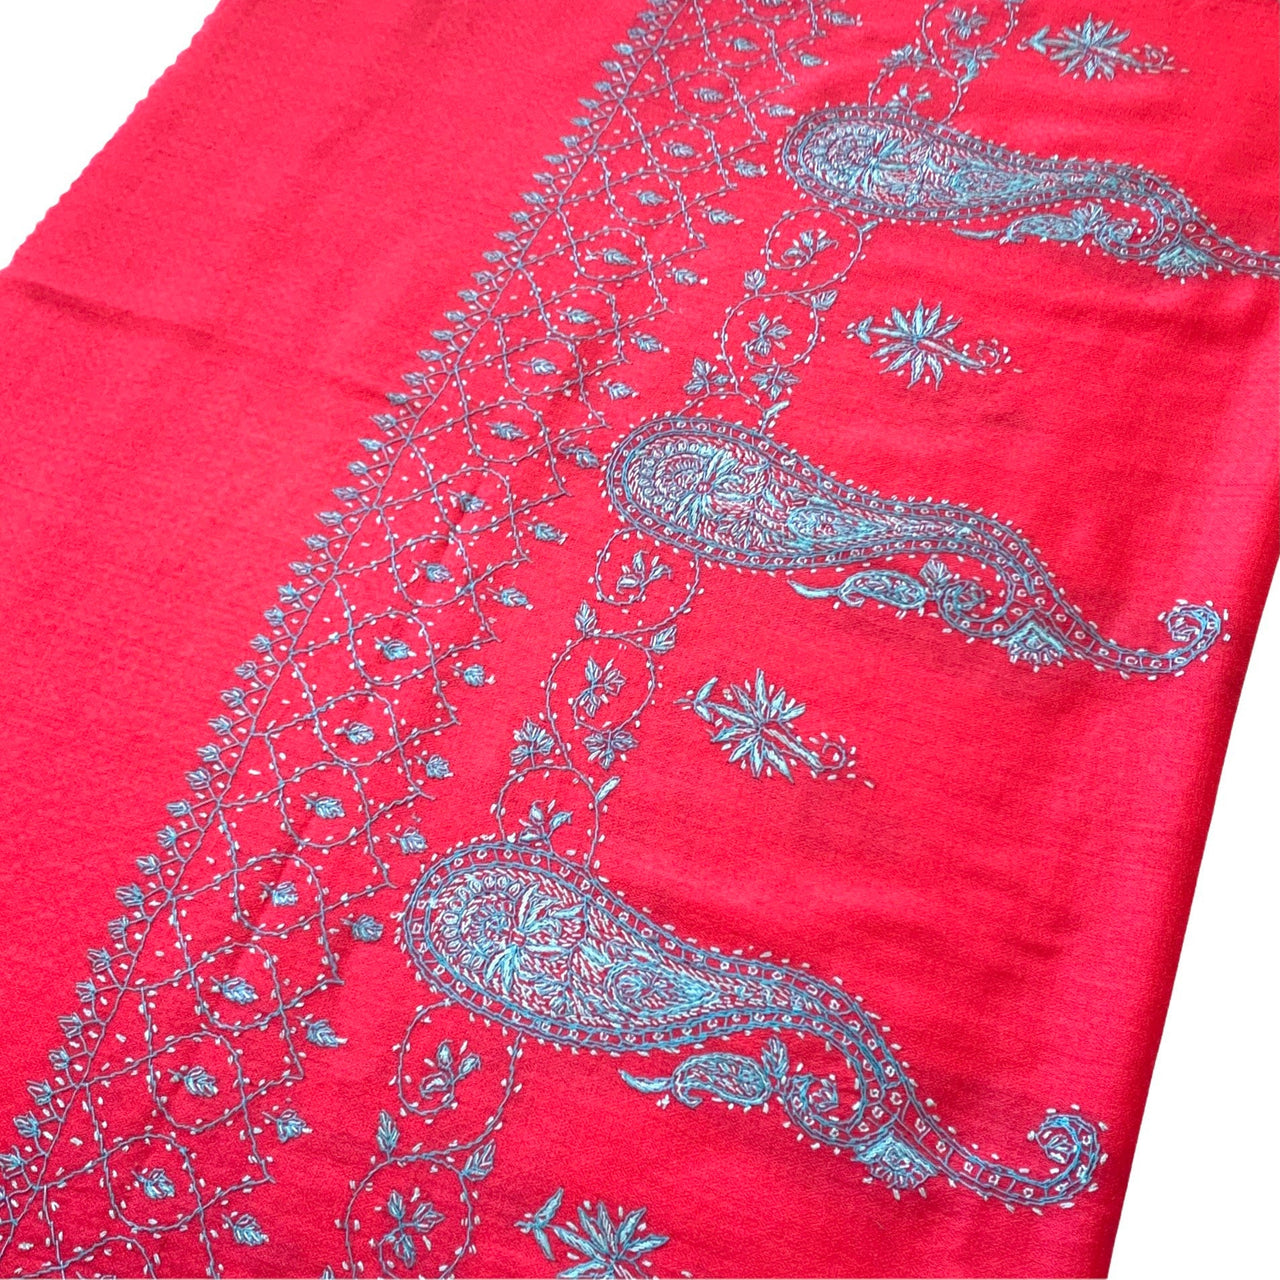 Cashmere Pink Pashmina Hand embroidered Scarf shawl wrap Stole